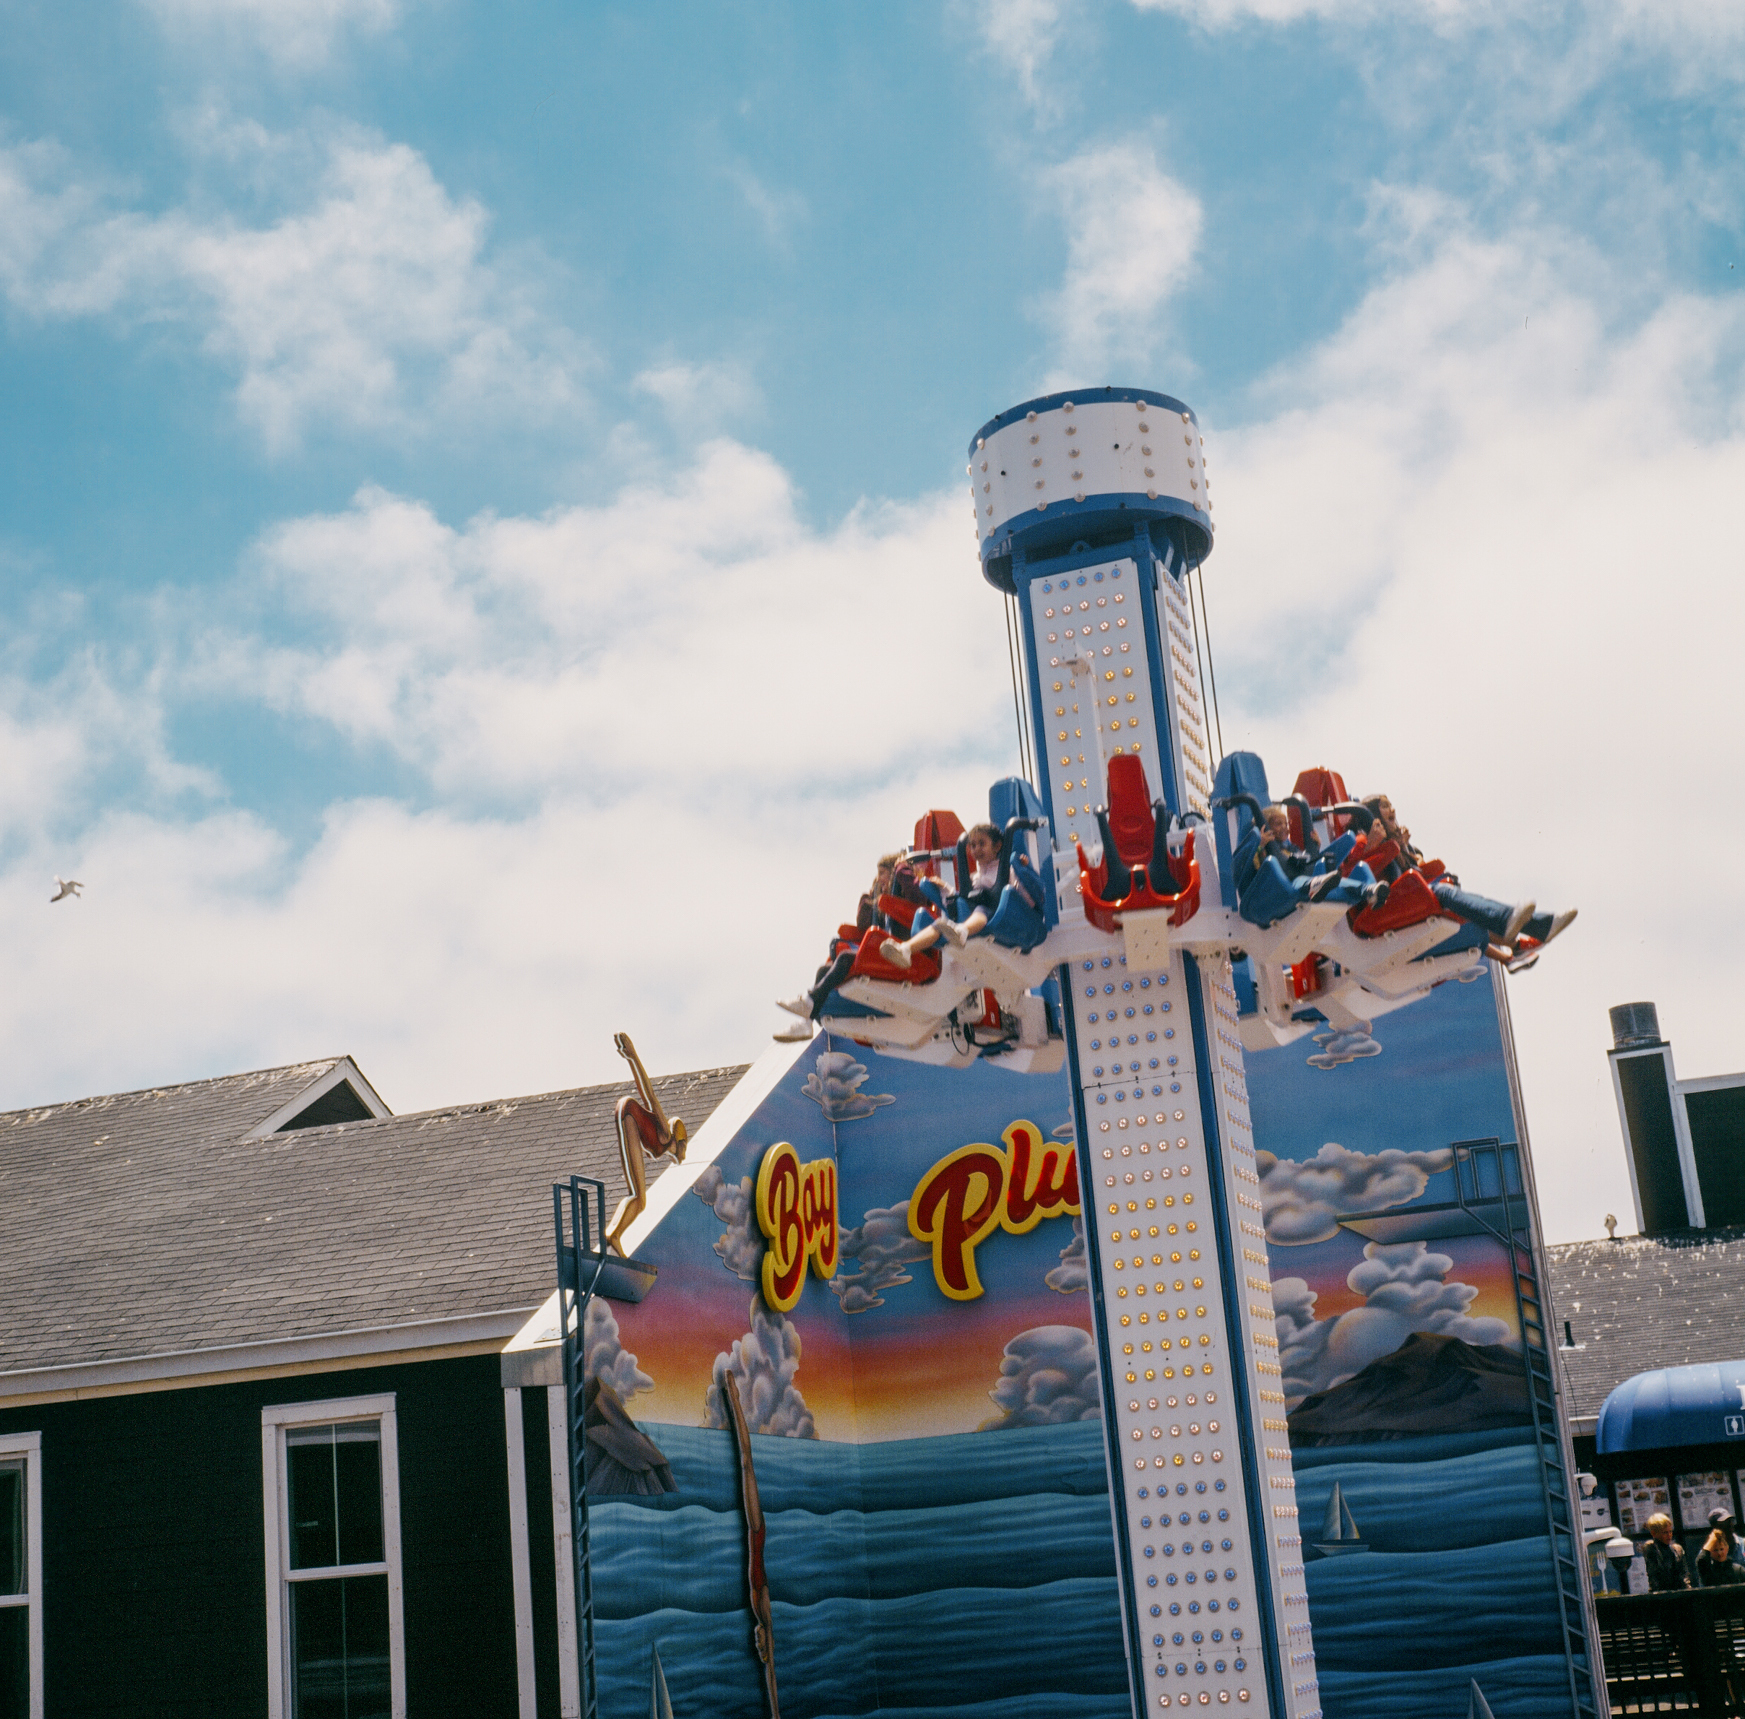 a scan of a color slide photo of a tourist atraction in san francisco. it has children sitting on a vertical amusement park ride.